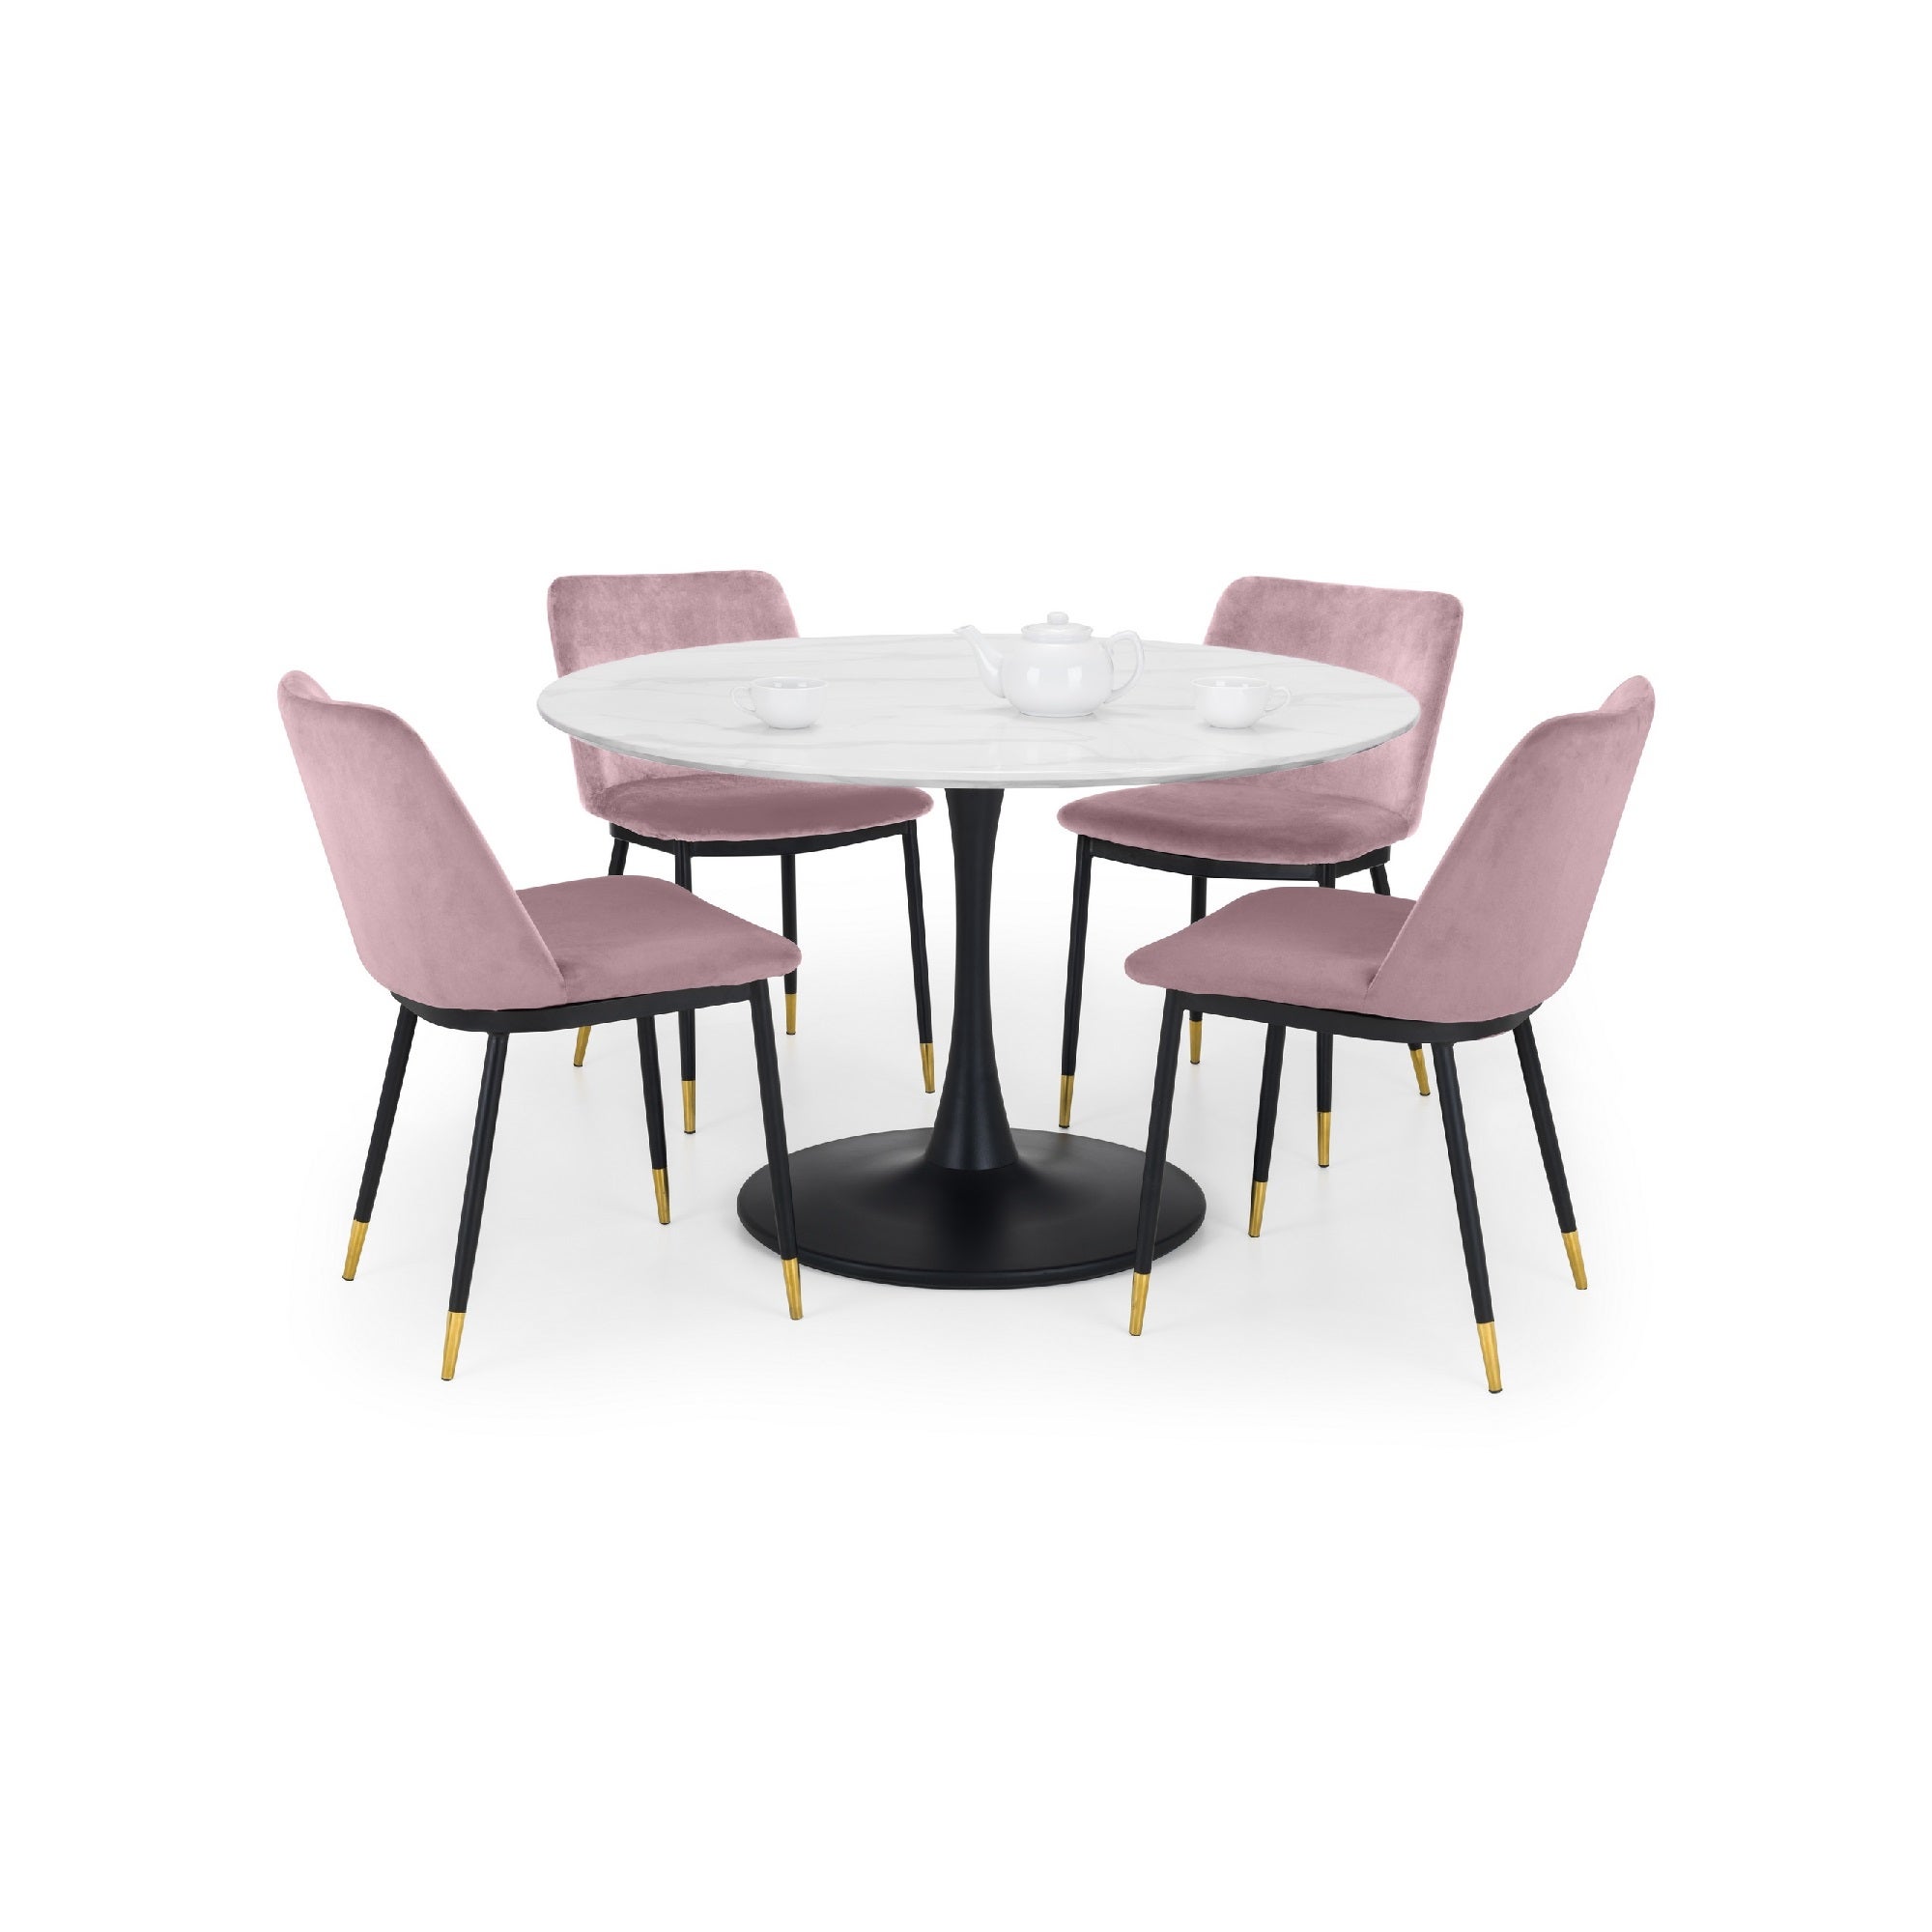 Holland Round Pedestal Dining Table With 4 Delaunay Chairs Pink